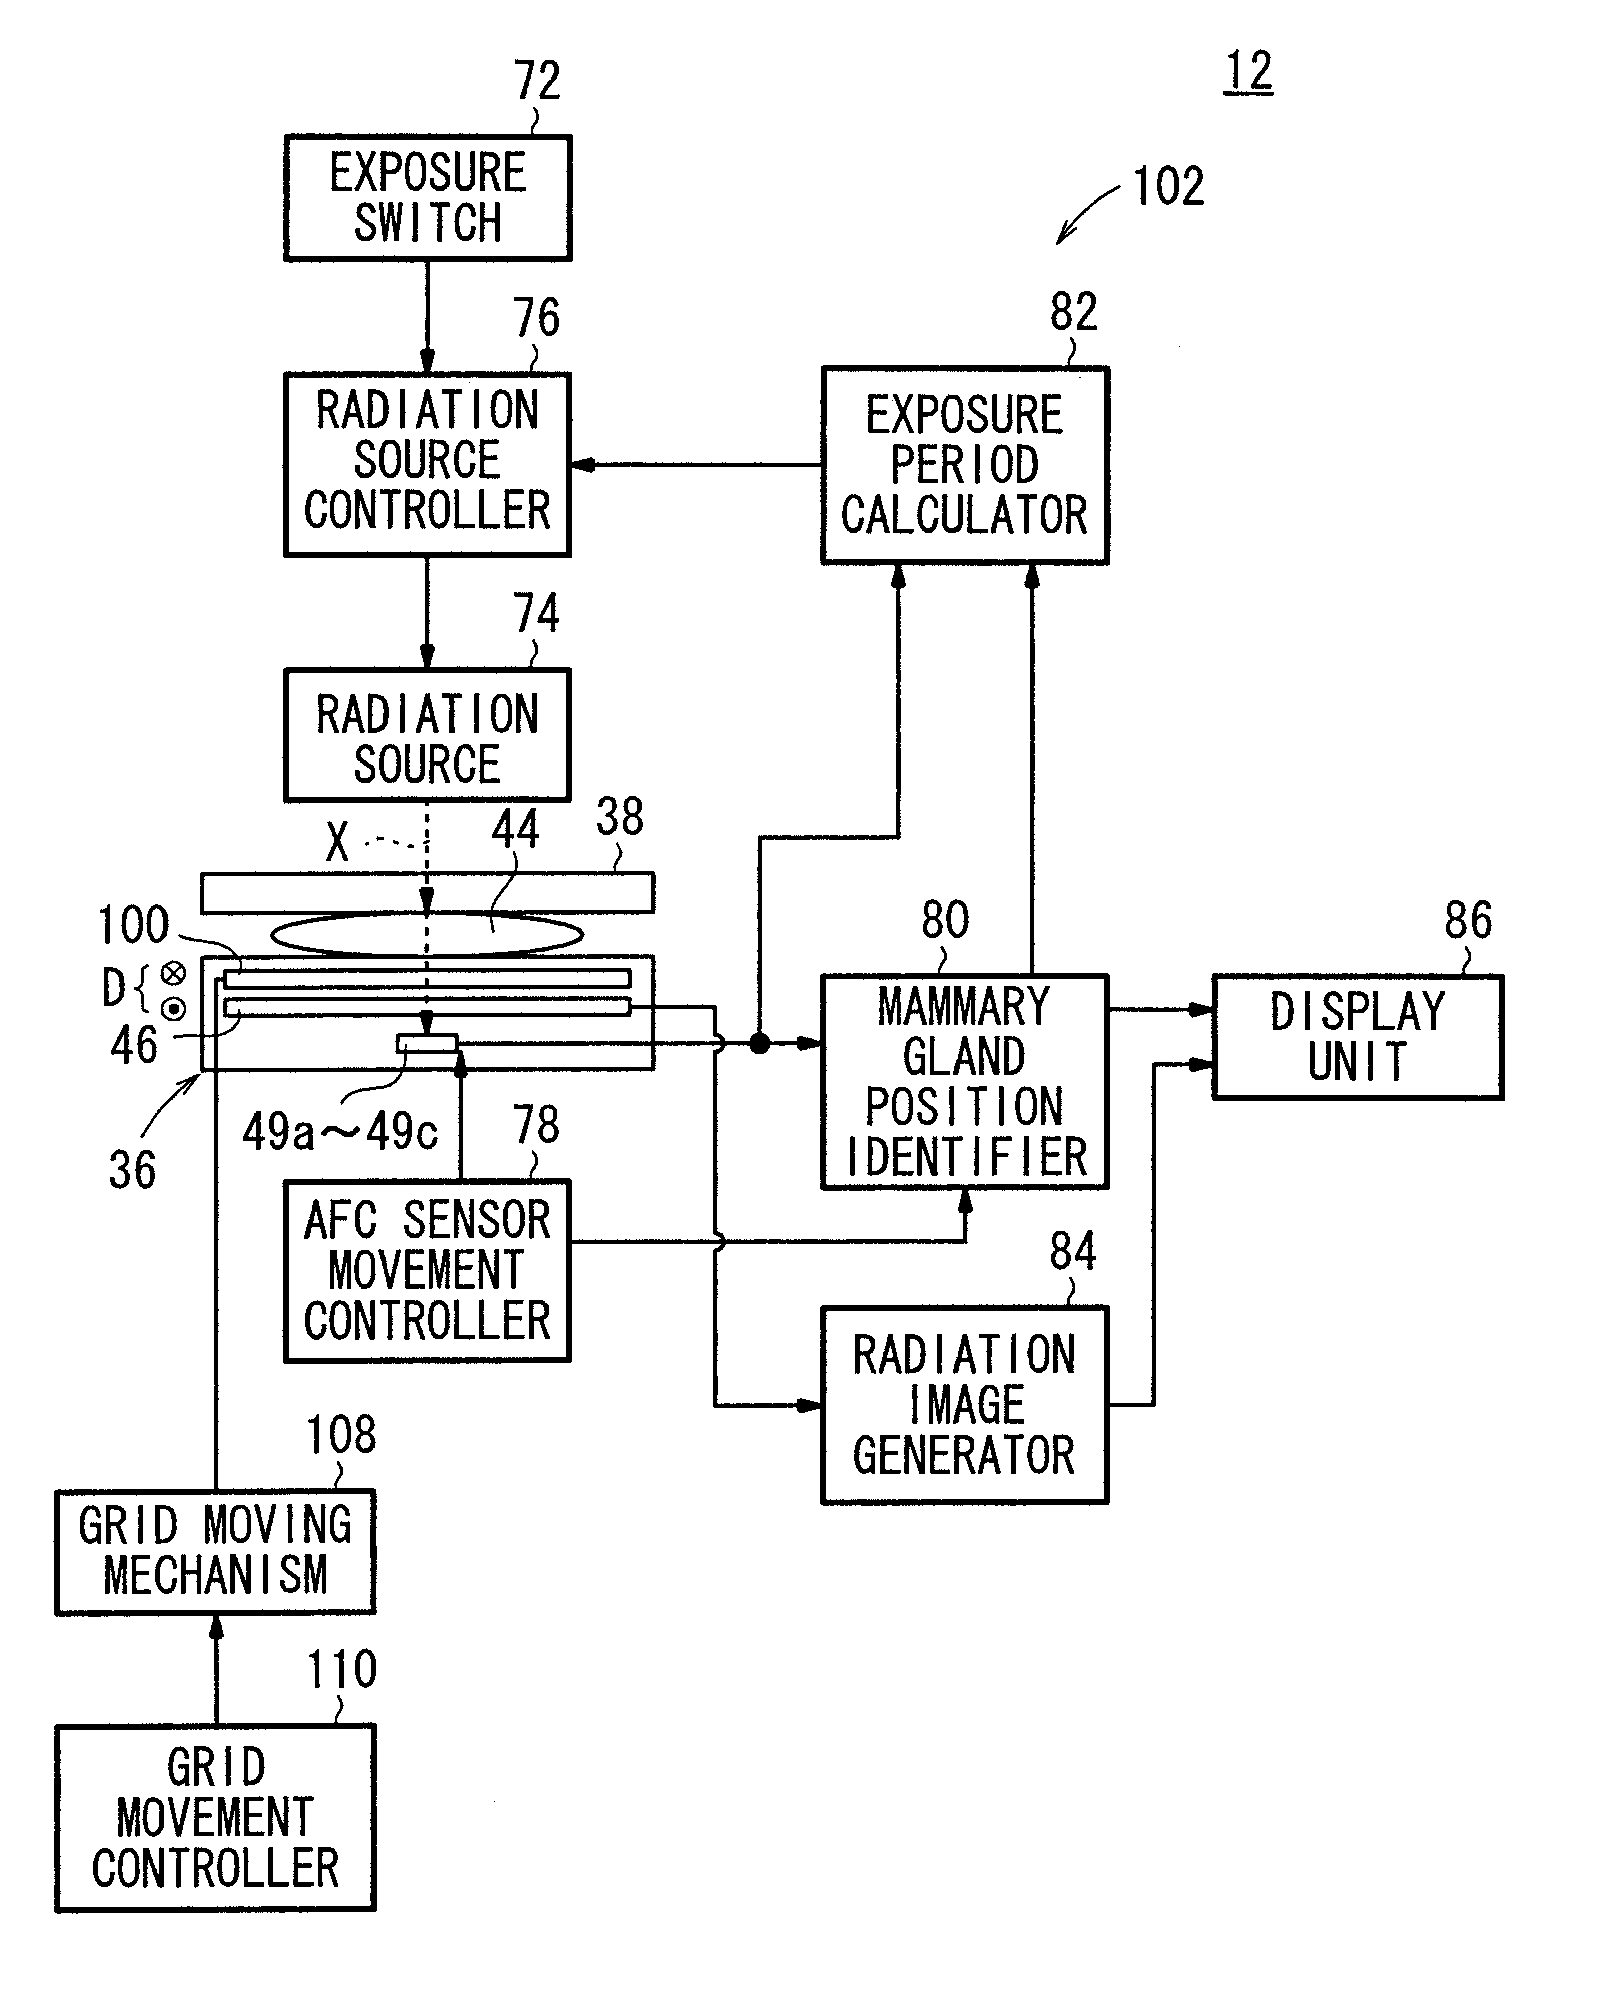 Radiation image capturing apparatus and grid moving device